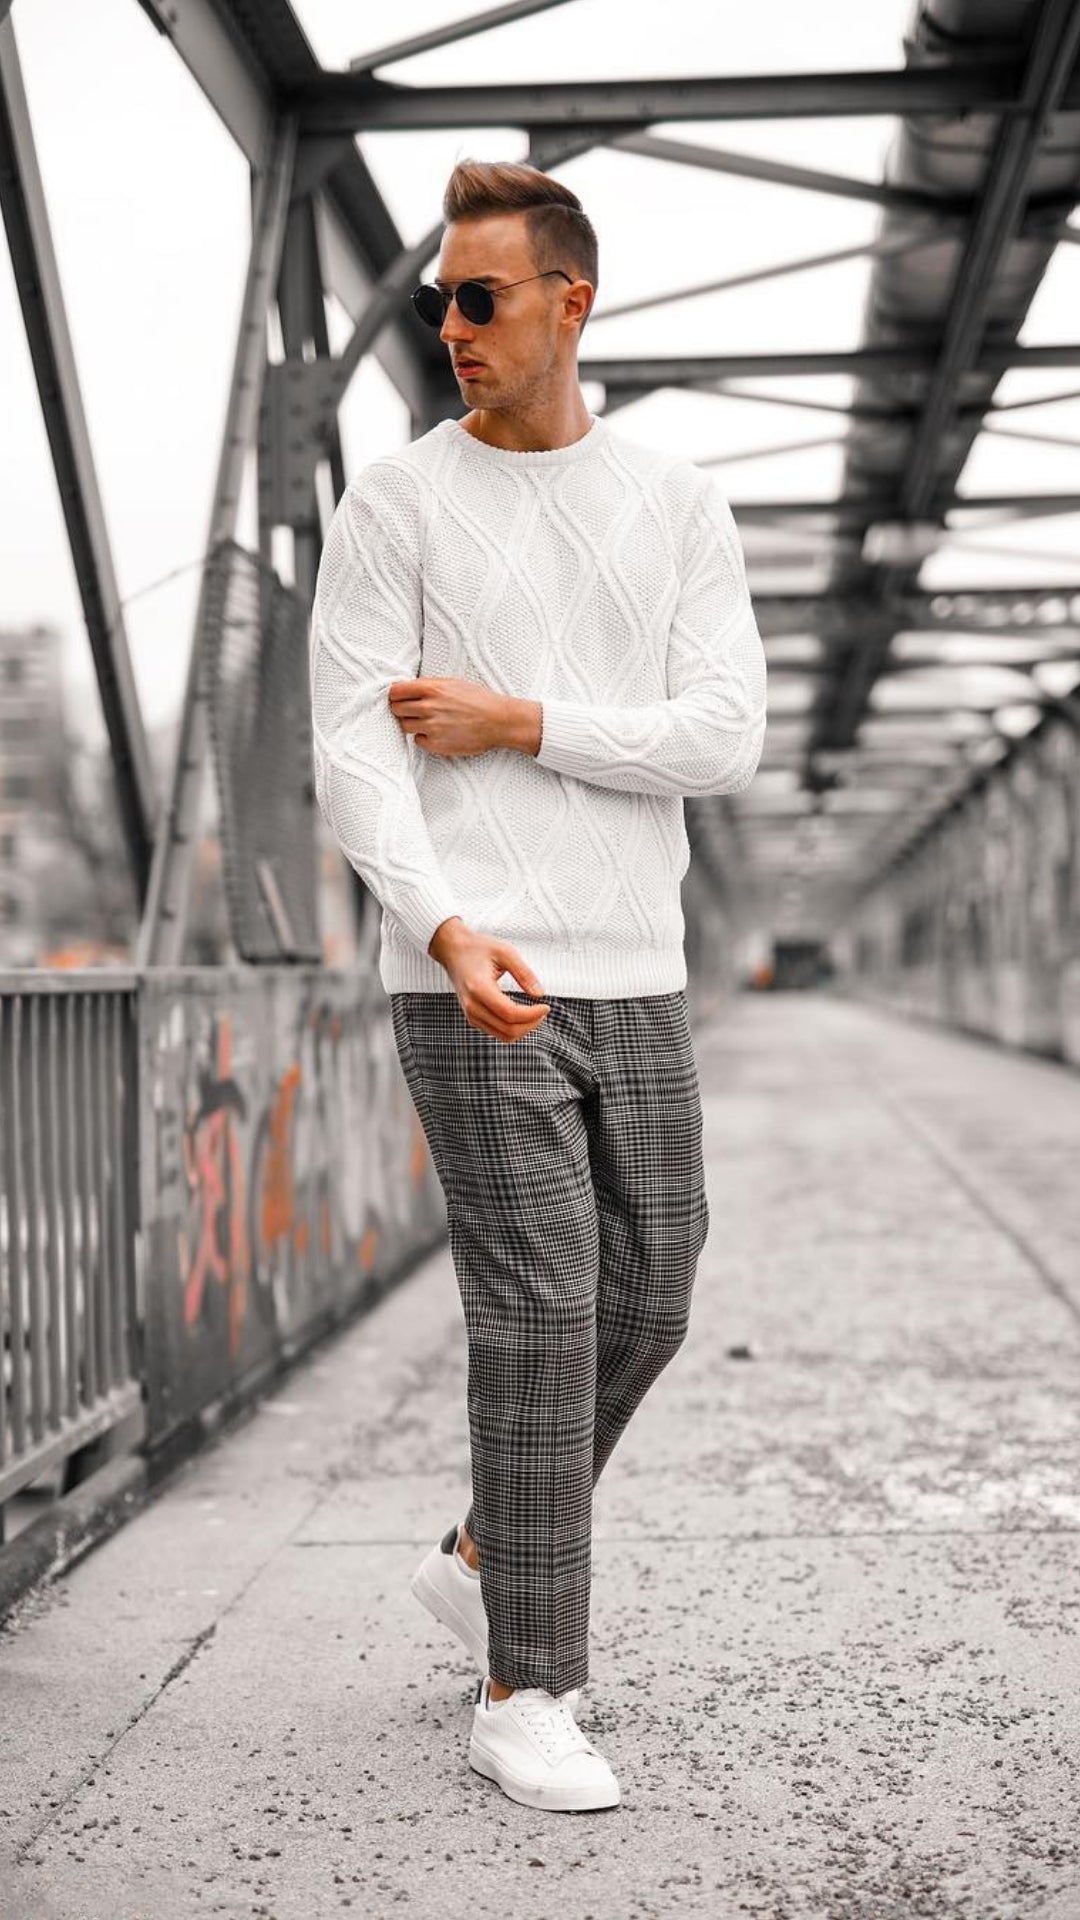 casual fall outfits for men